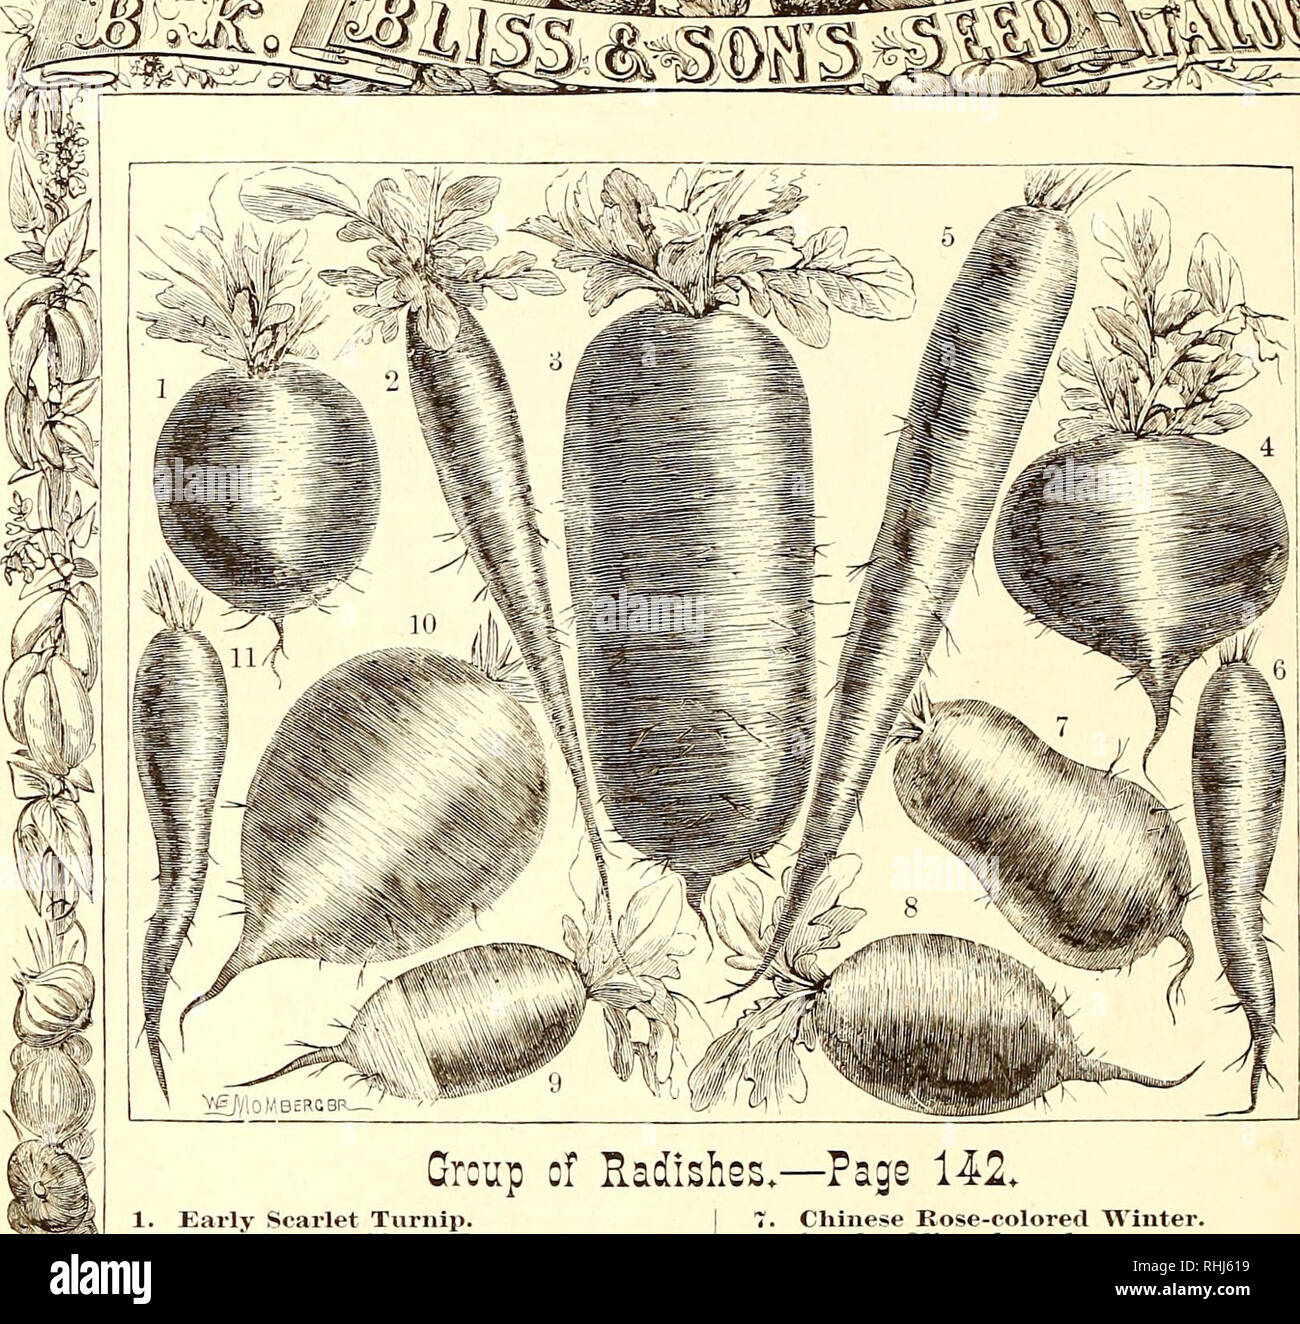 . B.K. Bliss and Son's illustrated spring catalogue and amateur's guide to the flower and kitchen garden. Flowers Catalogs; Plants Catalogs; Vegetables Seeds Catalogs; Gardening Catalogs; B. K. Bliss (Firm); Flowers; Plants; Vegetables; Gardening. WIT-*. Grcup cf Radishes,—Page 142, 1. Early Scarlet Turnip. 2. Loni; Scarlet Sliort Top. .3. Black Spanish Long Winter. 4. YelloAv Turnip. 5. Long Salmon. 6. AVood's Early Frame. I 7. Chinese Eose-colored Winter. 8. Scarlet Olive-shaped. 9. French Breakfast. 10. Black Spanish Bound AVinter. 11. Long White Naples.. Please note that these images are e Stock Photo